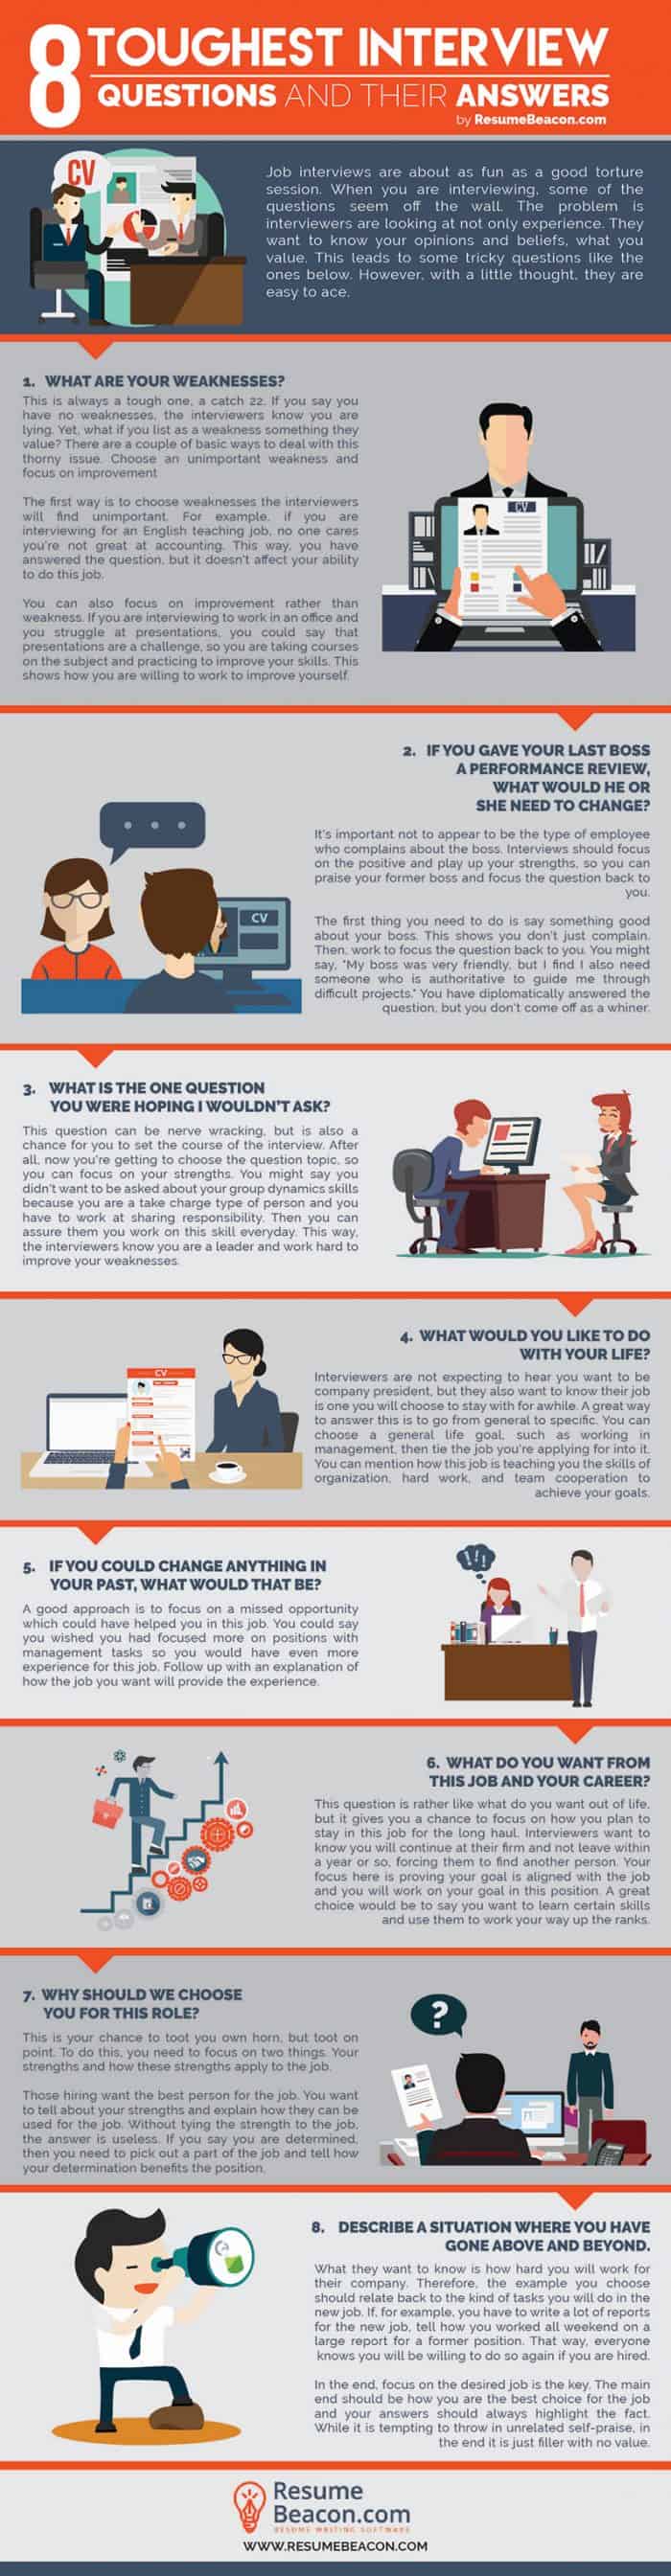 Infographic with 8 questions and answers for though job interview questions.